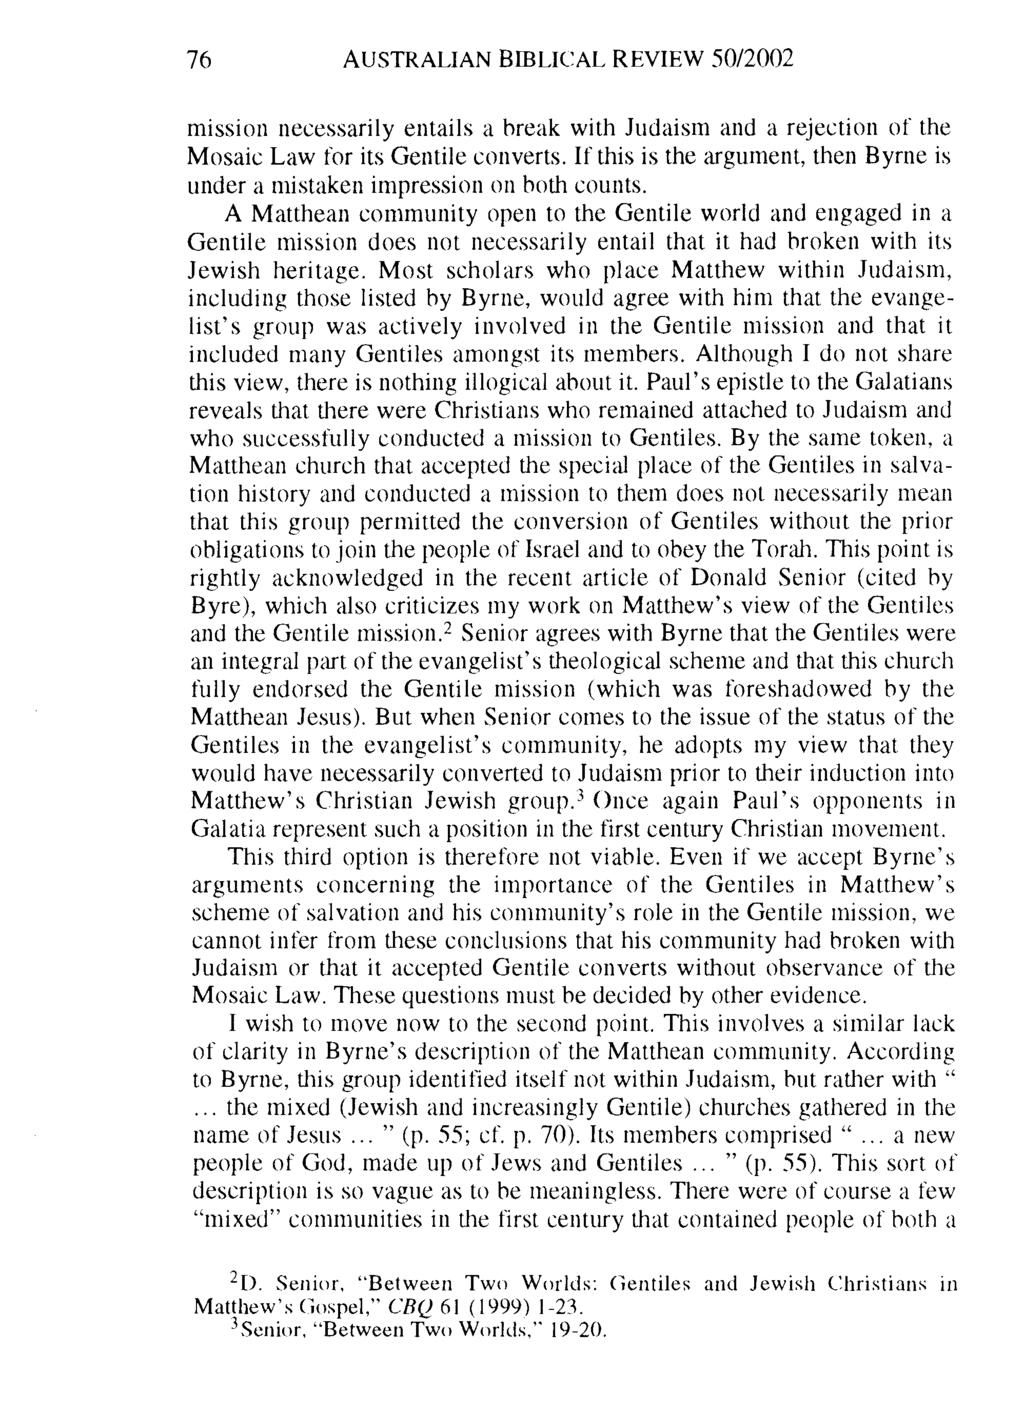 76 AUSTRALIAN BIBLICAL REVIEW 50/2002 mission necessarily entails a hreak with Judaism and a rejection of the Mosaic Law for its Gentile converts.